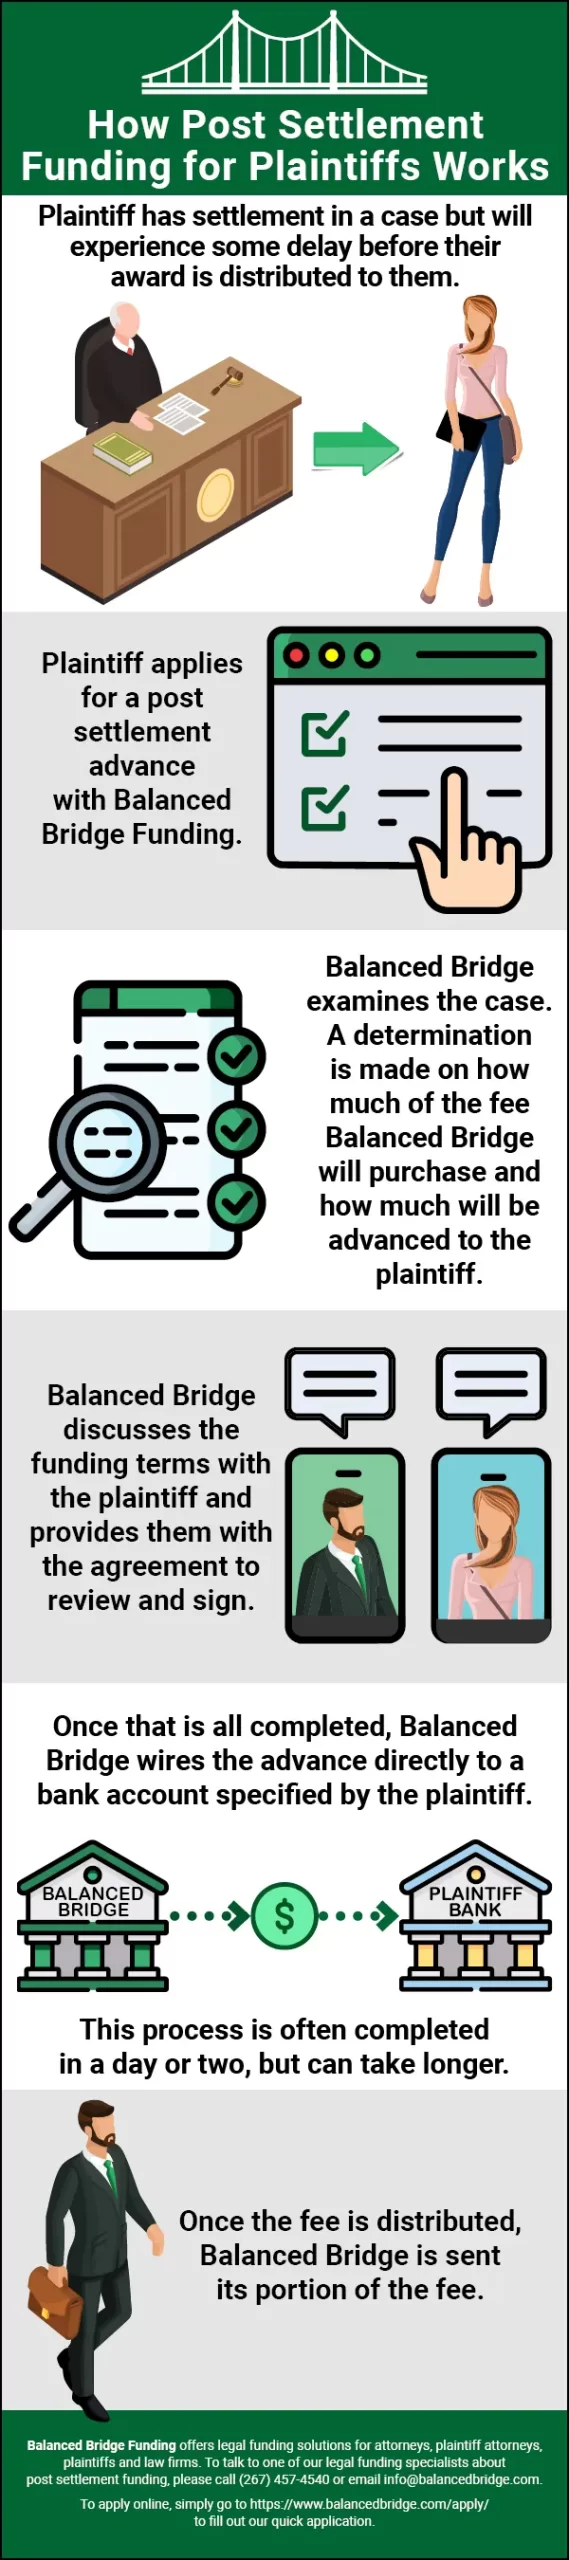 E-Cigarette Maker Juul to Pay Over a Billion in Lawsuit Settlement Infographic